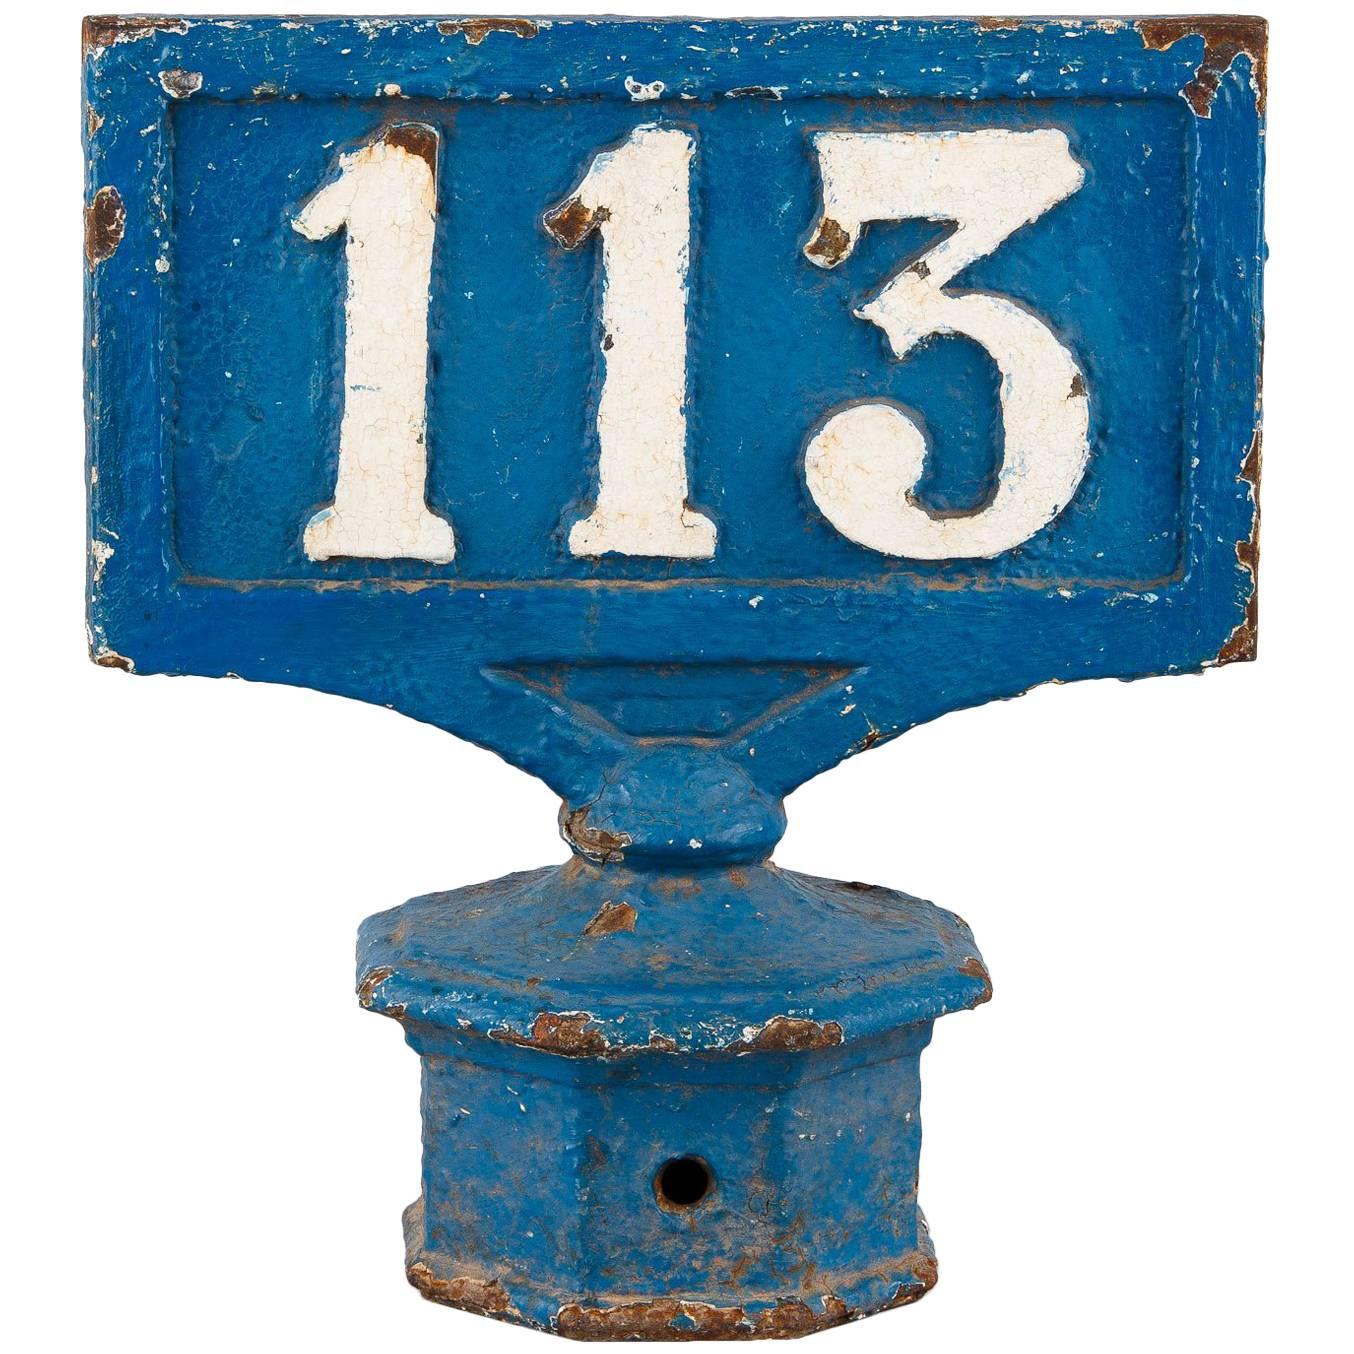 Painted Cast Iron Railway Sign, France, Late 1800s